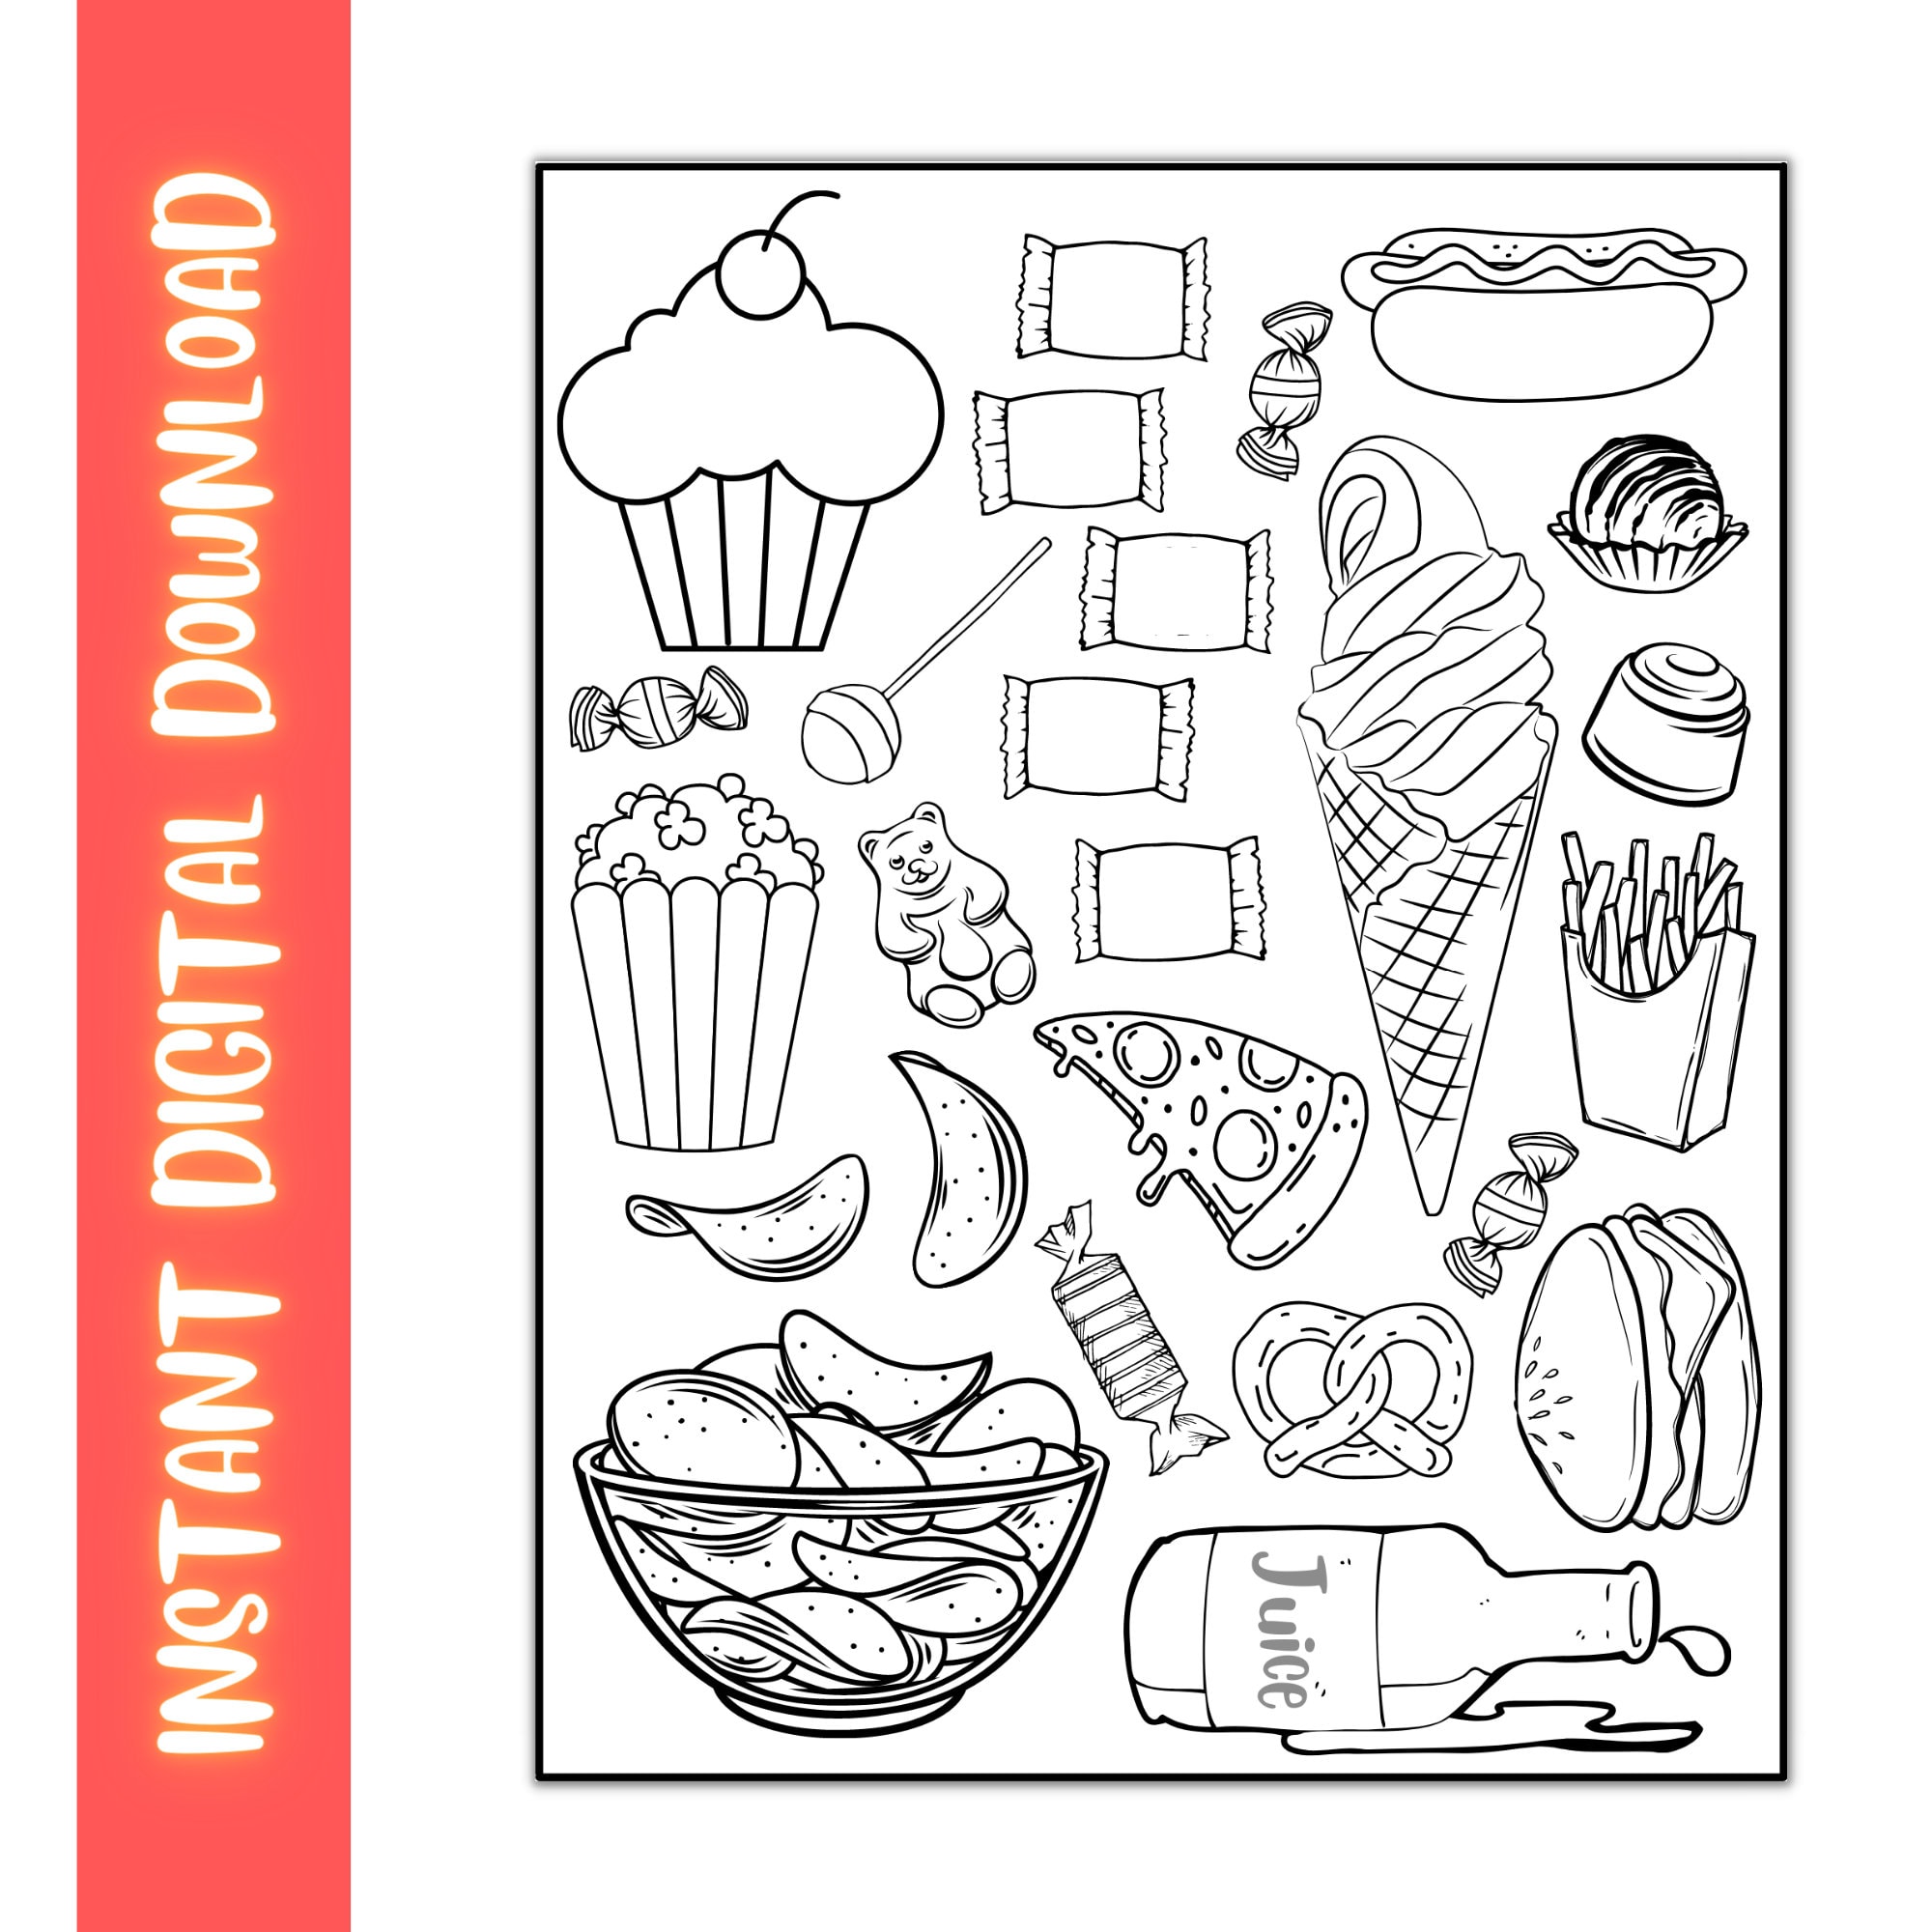 Junk food coloring page printable food coloring page for kids download now